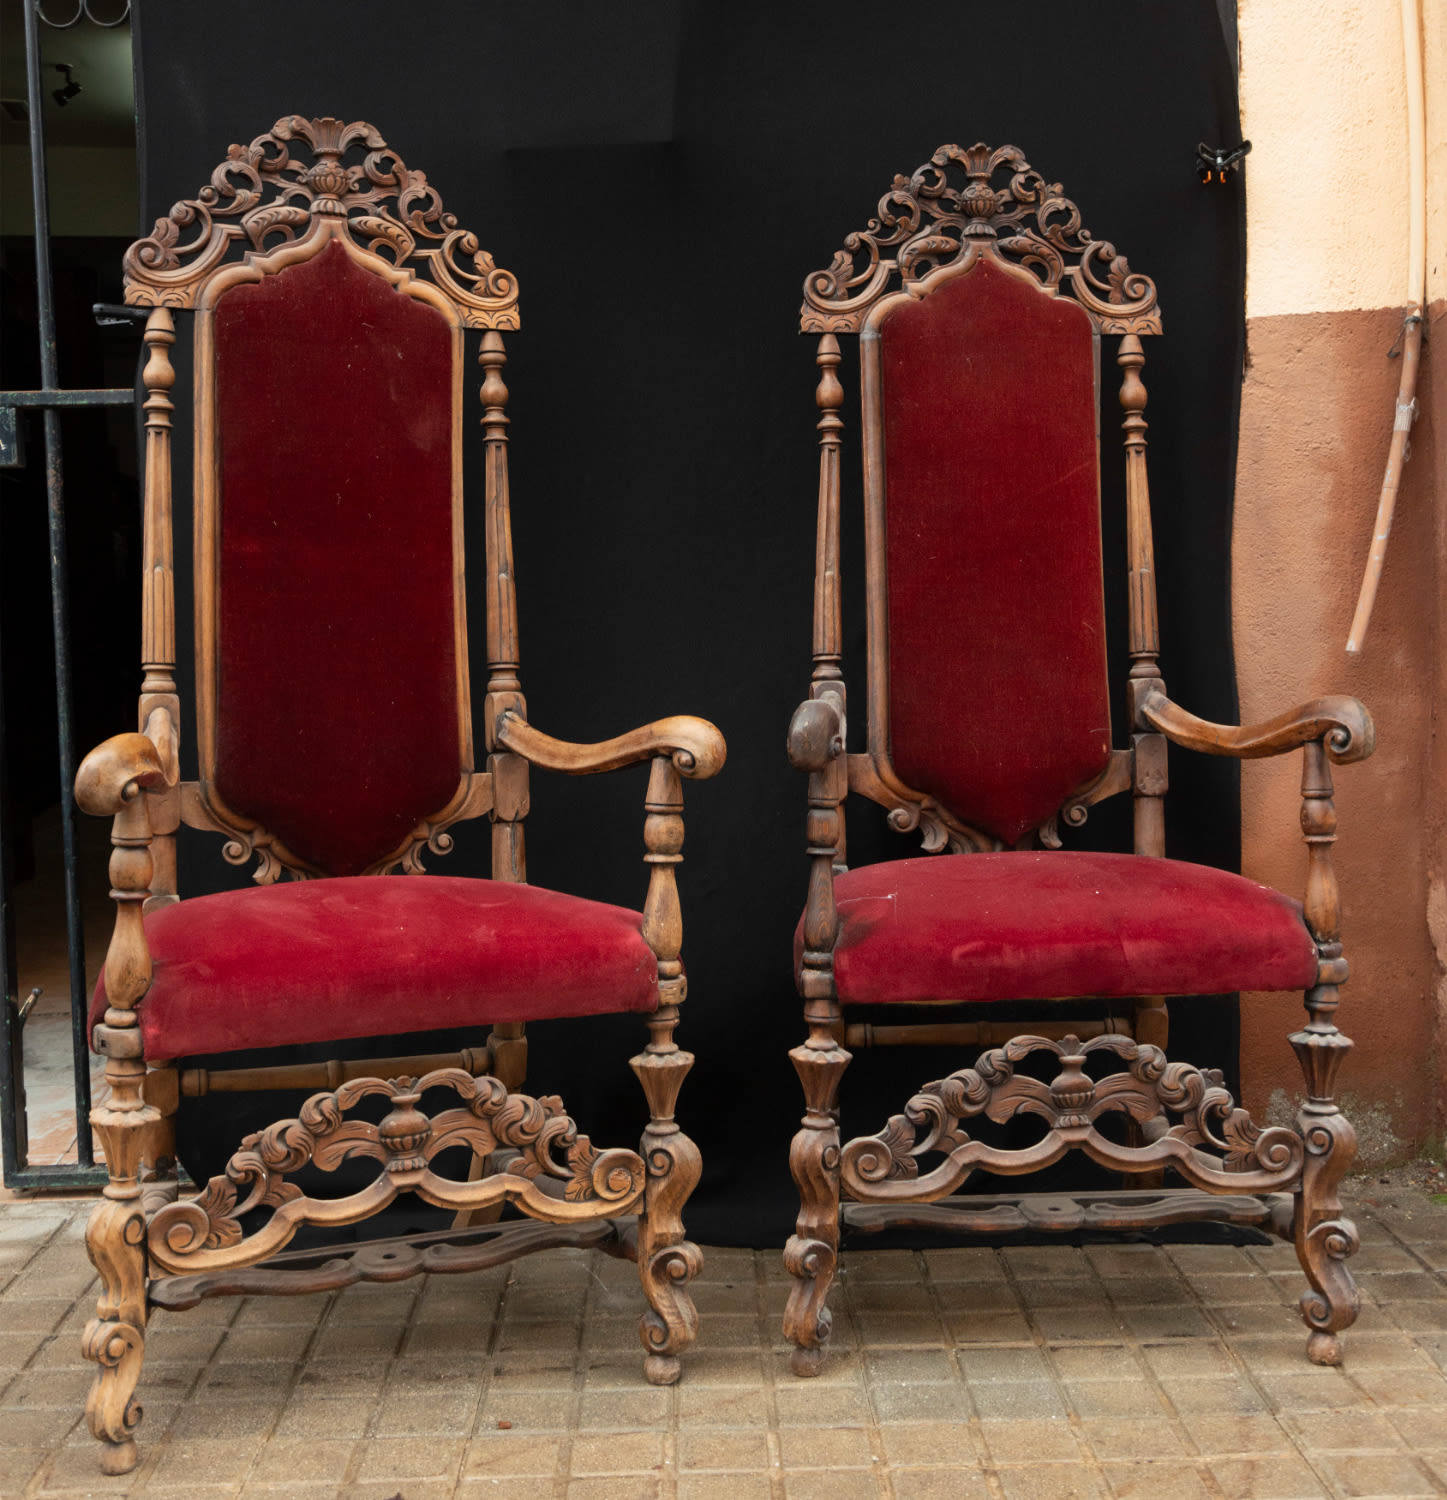 Pair of walnut armchairs from the 18th century.